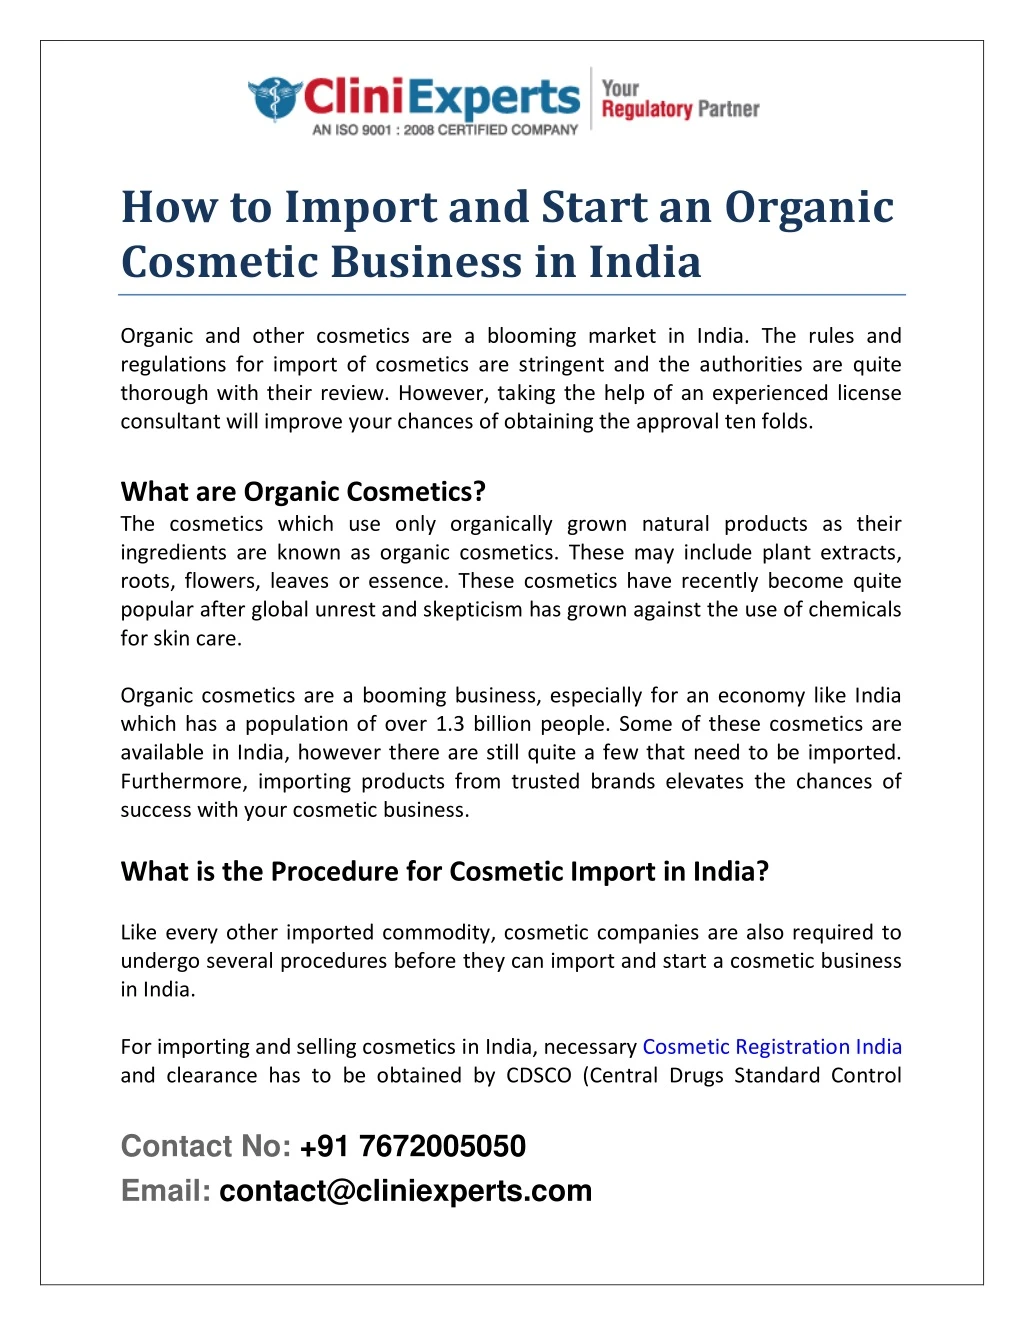 how to import and start an organic cosmetic